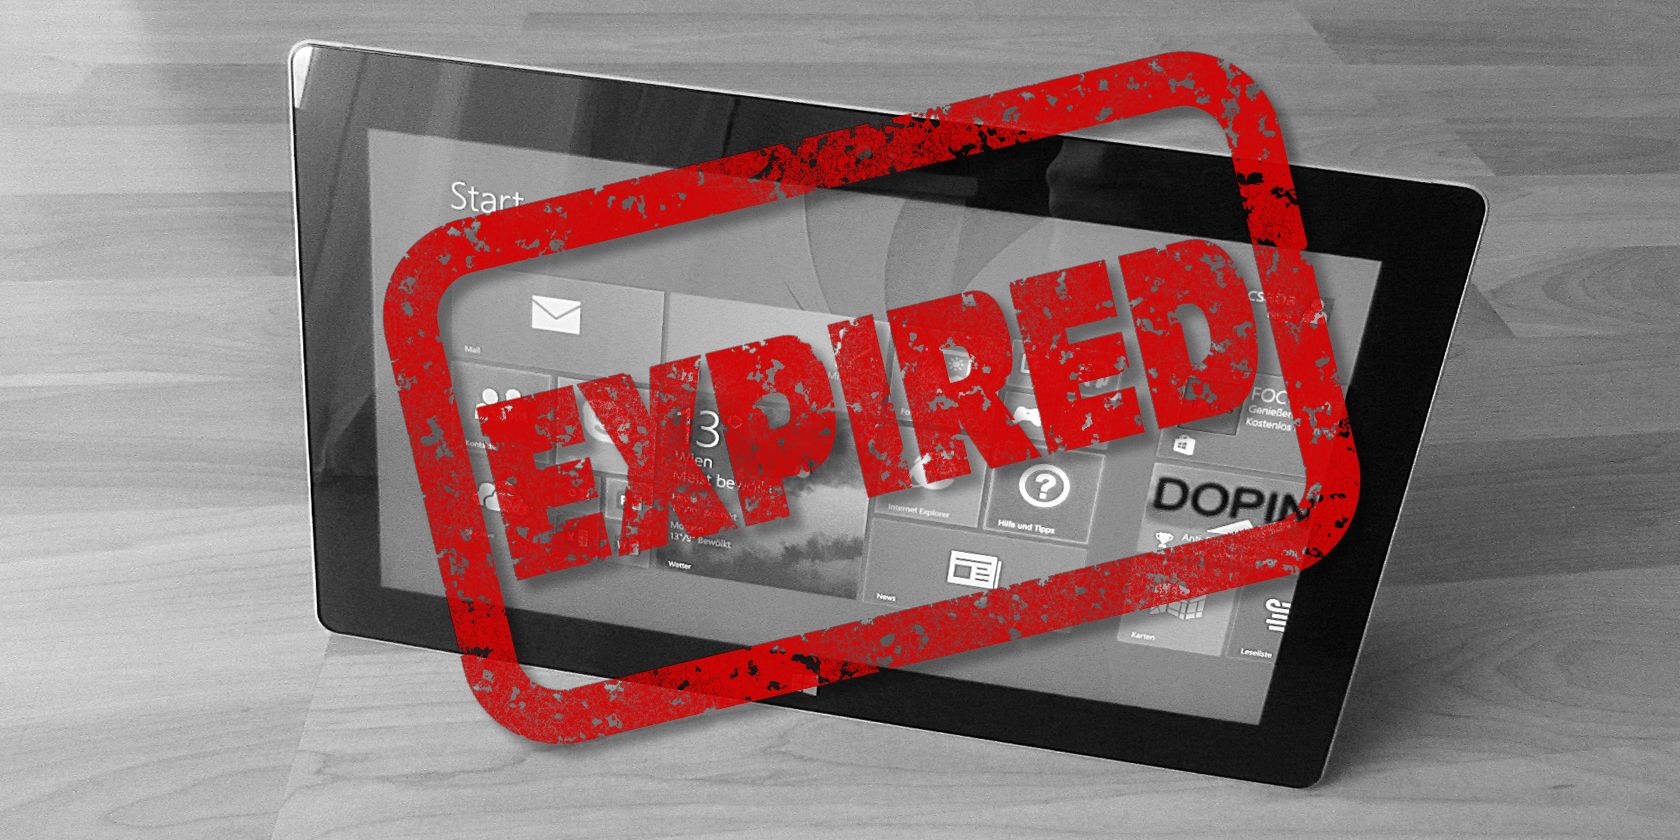 Expired Windows 8.1 tablet